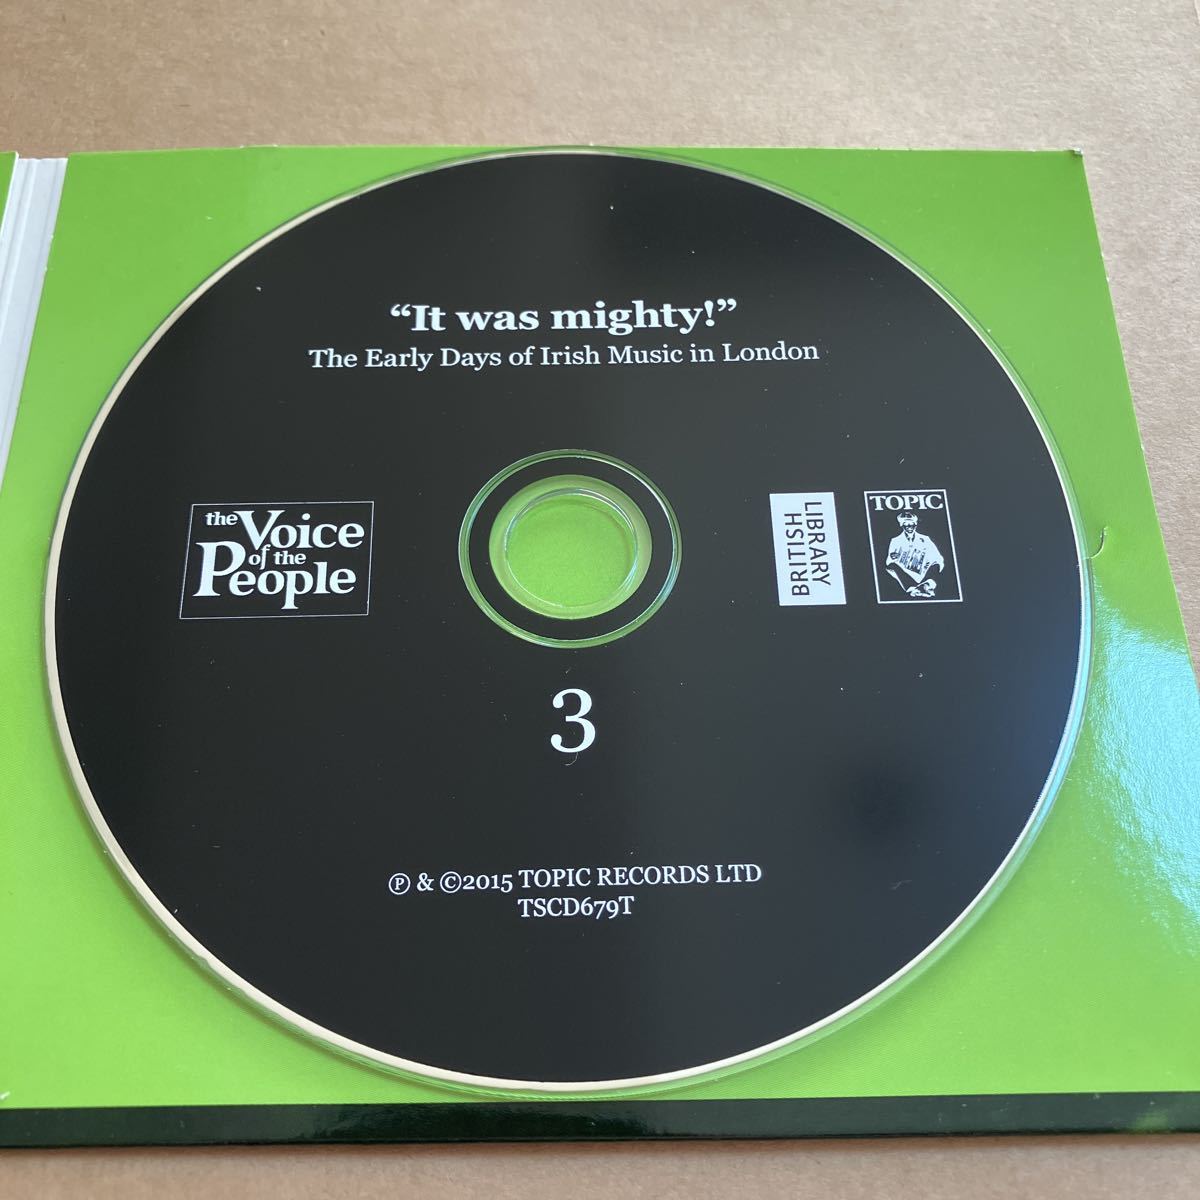 CD It Was Mighty The Early Days of Irish Music in London TSCD679T THE VOICE OF THE PEOPLE 3CD ライナー傷みあり_画像6